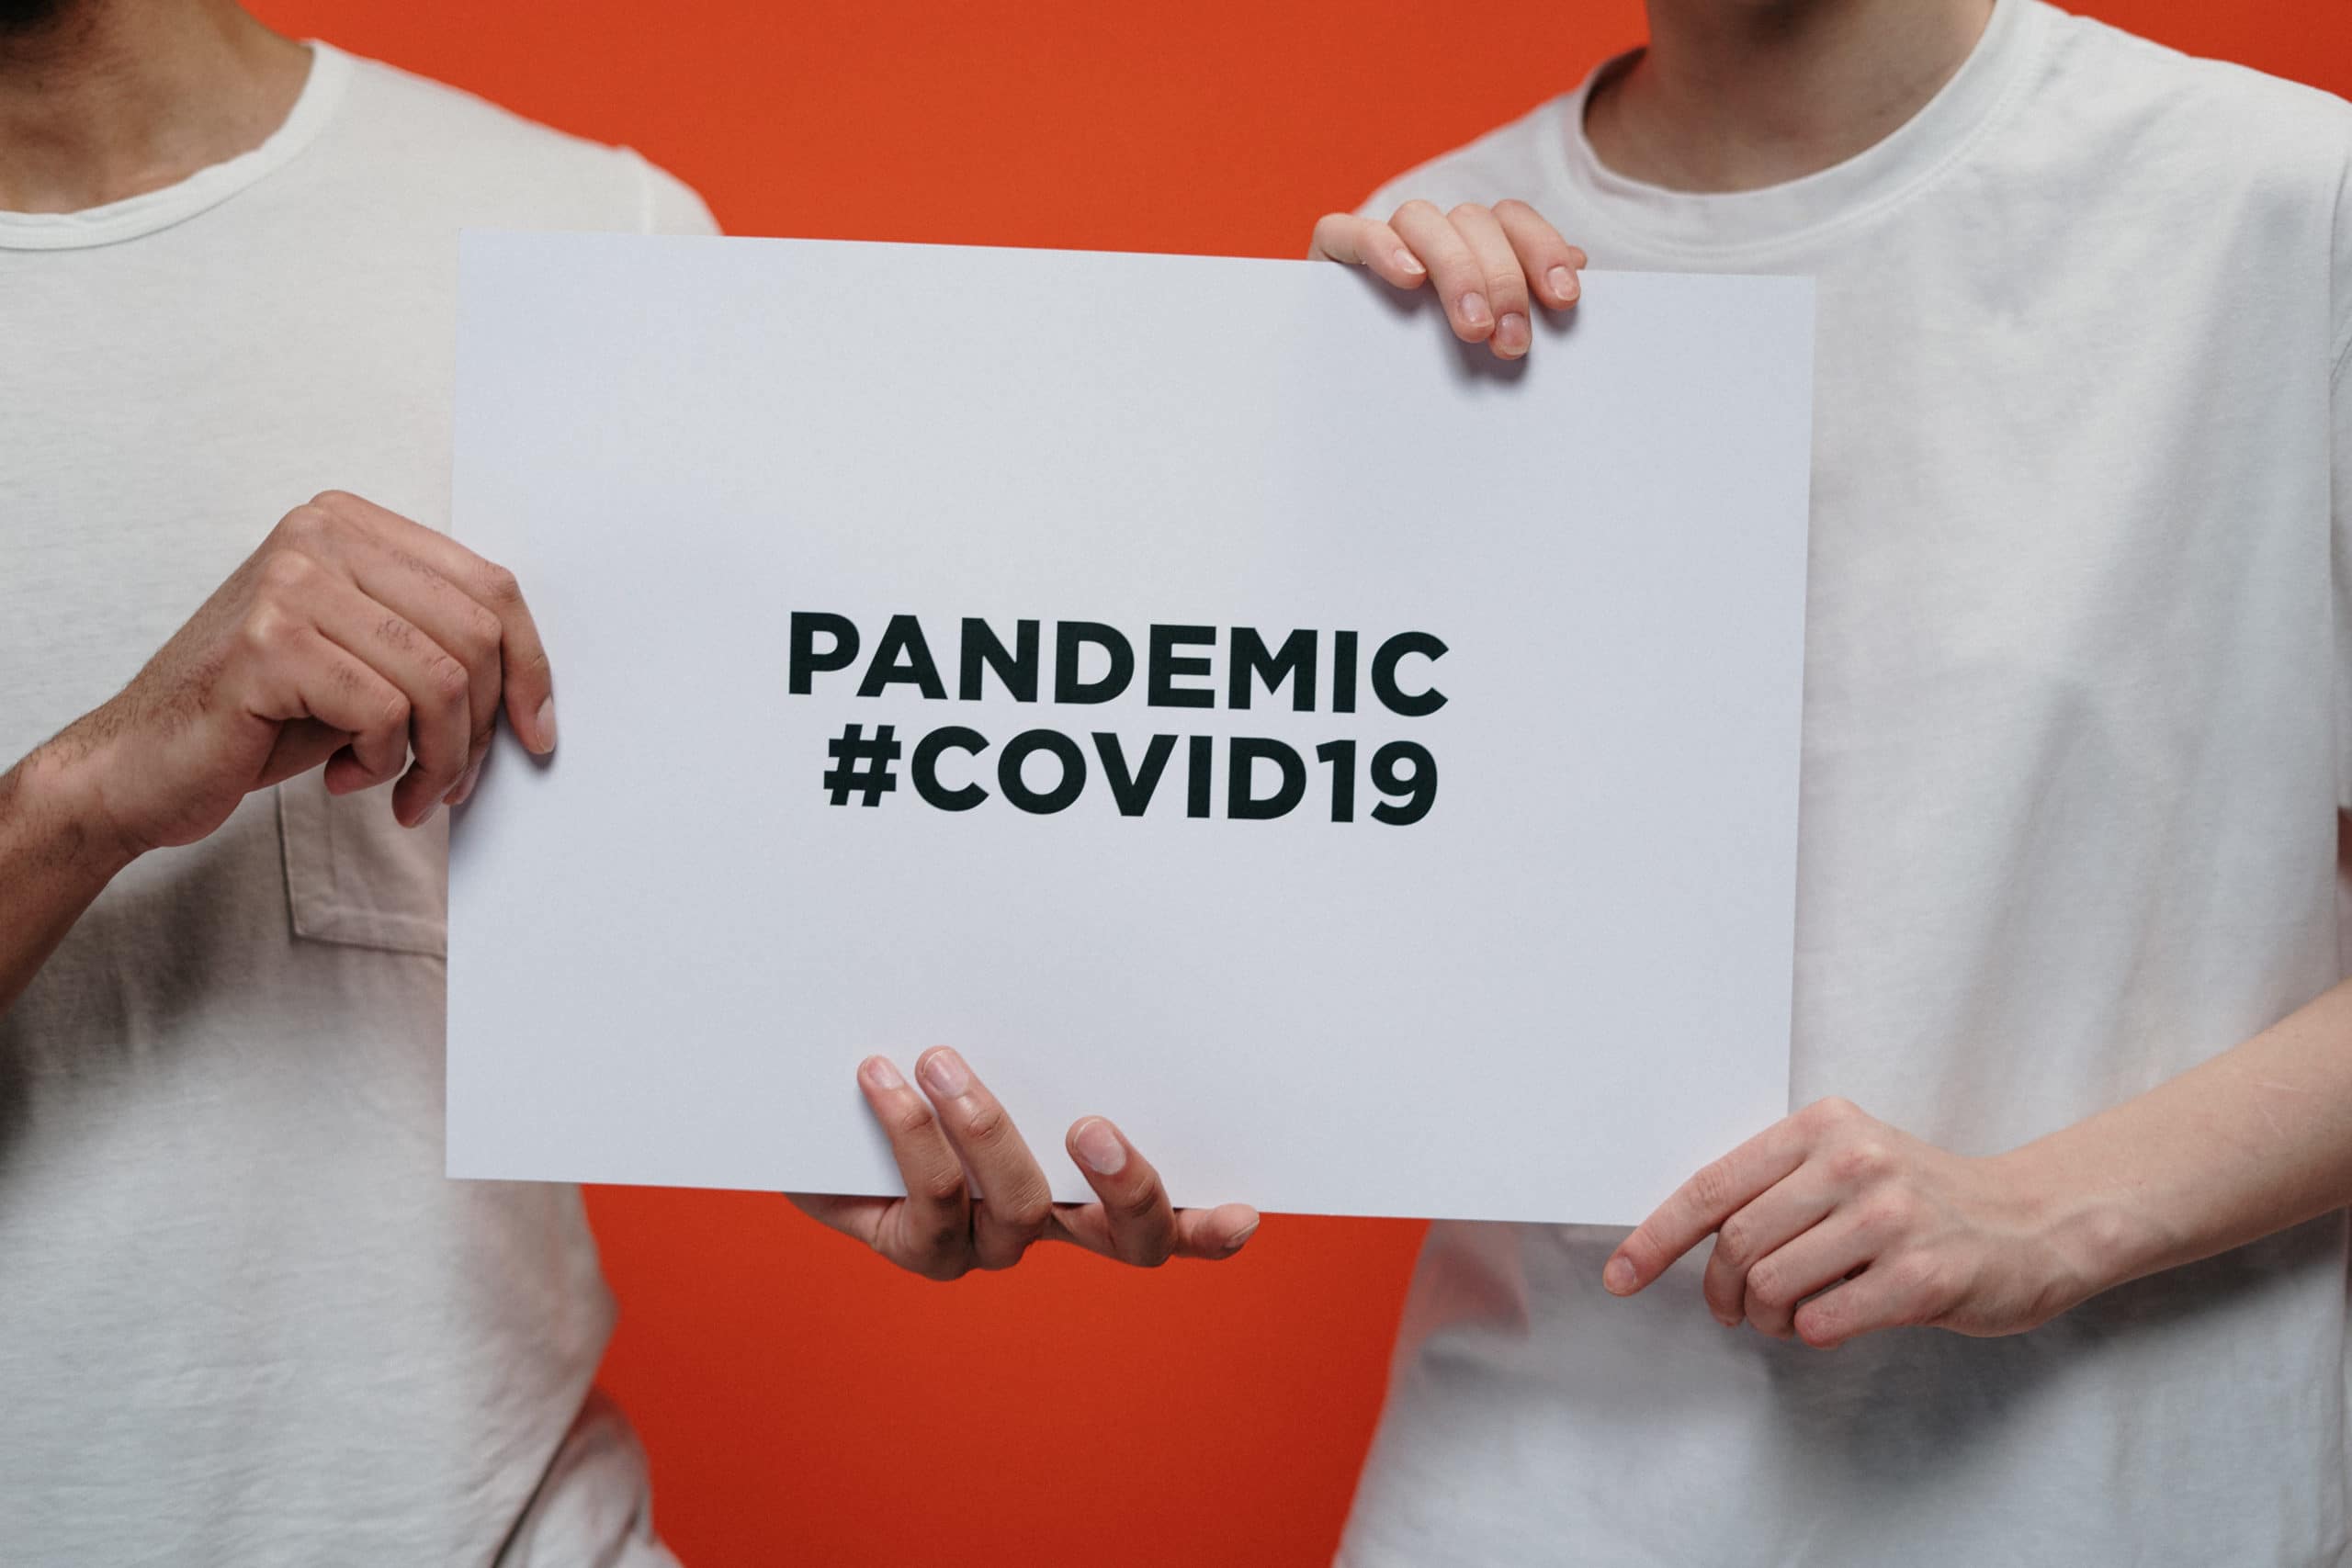 Painting During the COVID-19 Pandemic